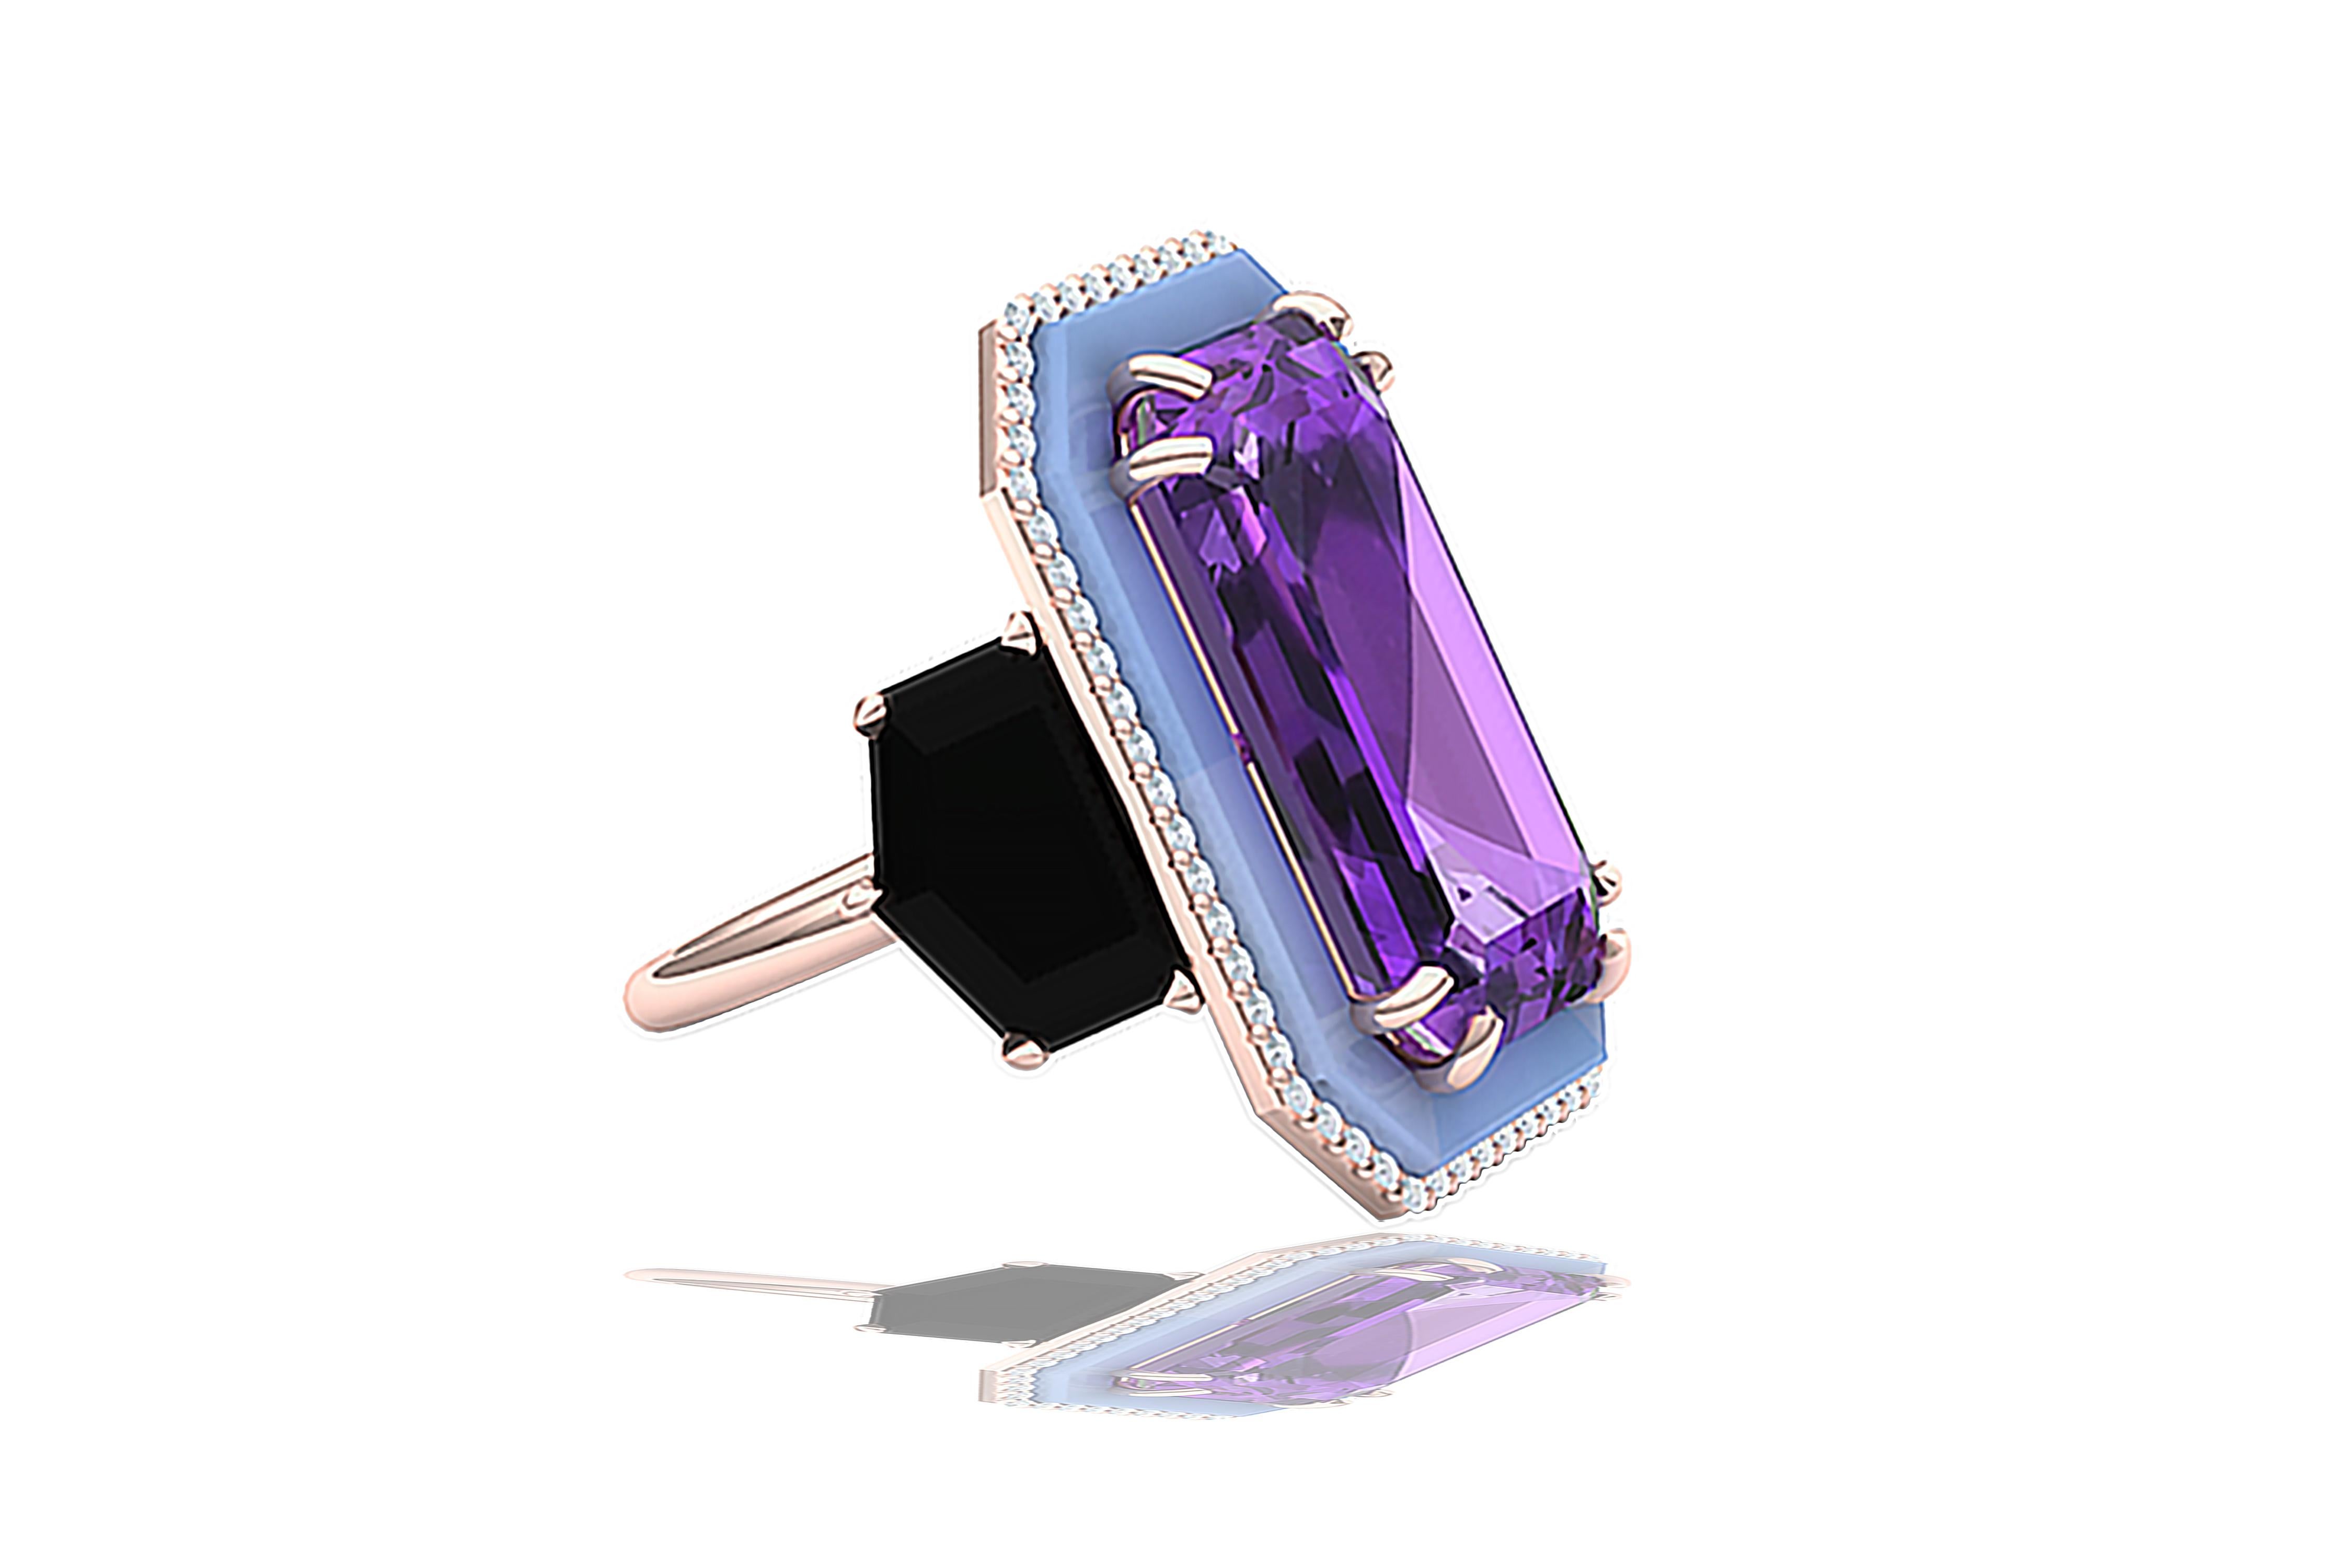 A beautiful elongated emerald cut Amethyst from old material in the 1970's.  This stone shows the difference between itself and its contemporary counterparts. We took a stone that was already unique and added to its splendor with this beautiful